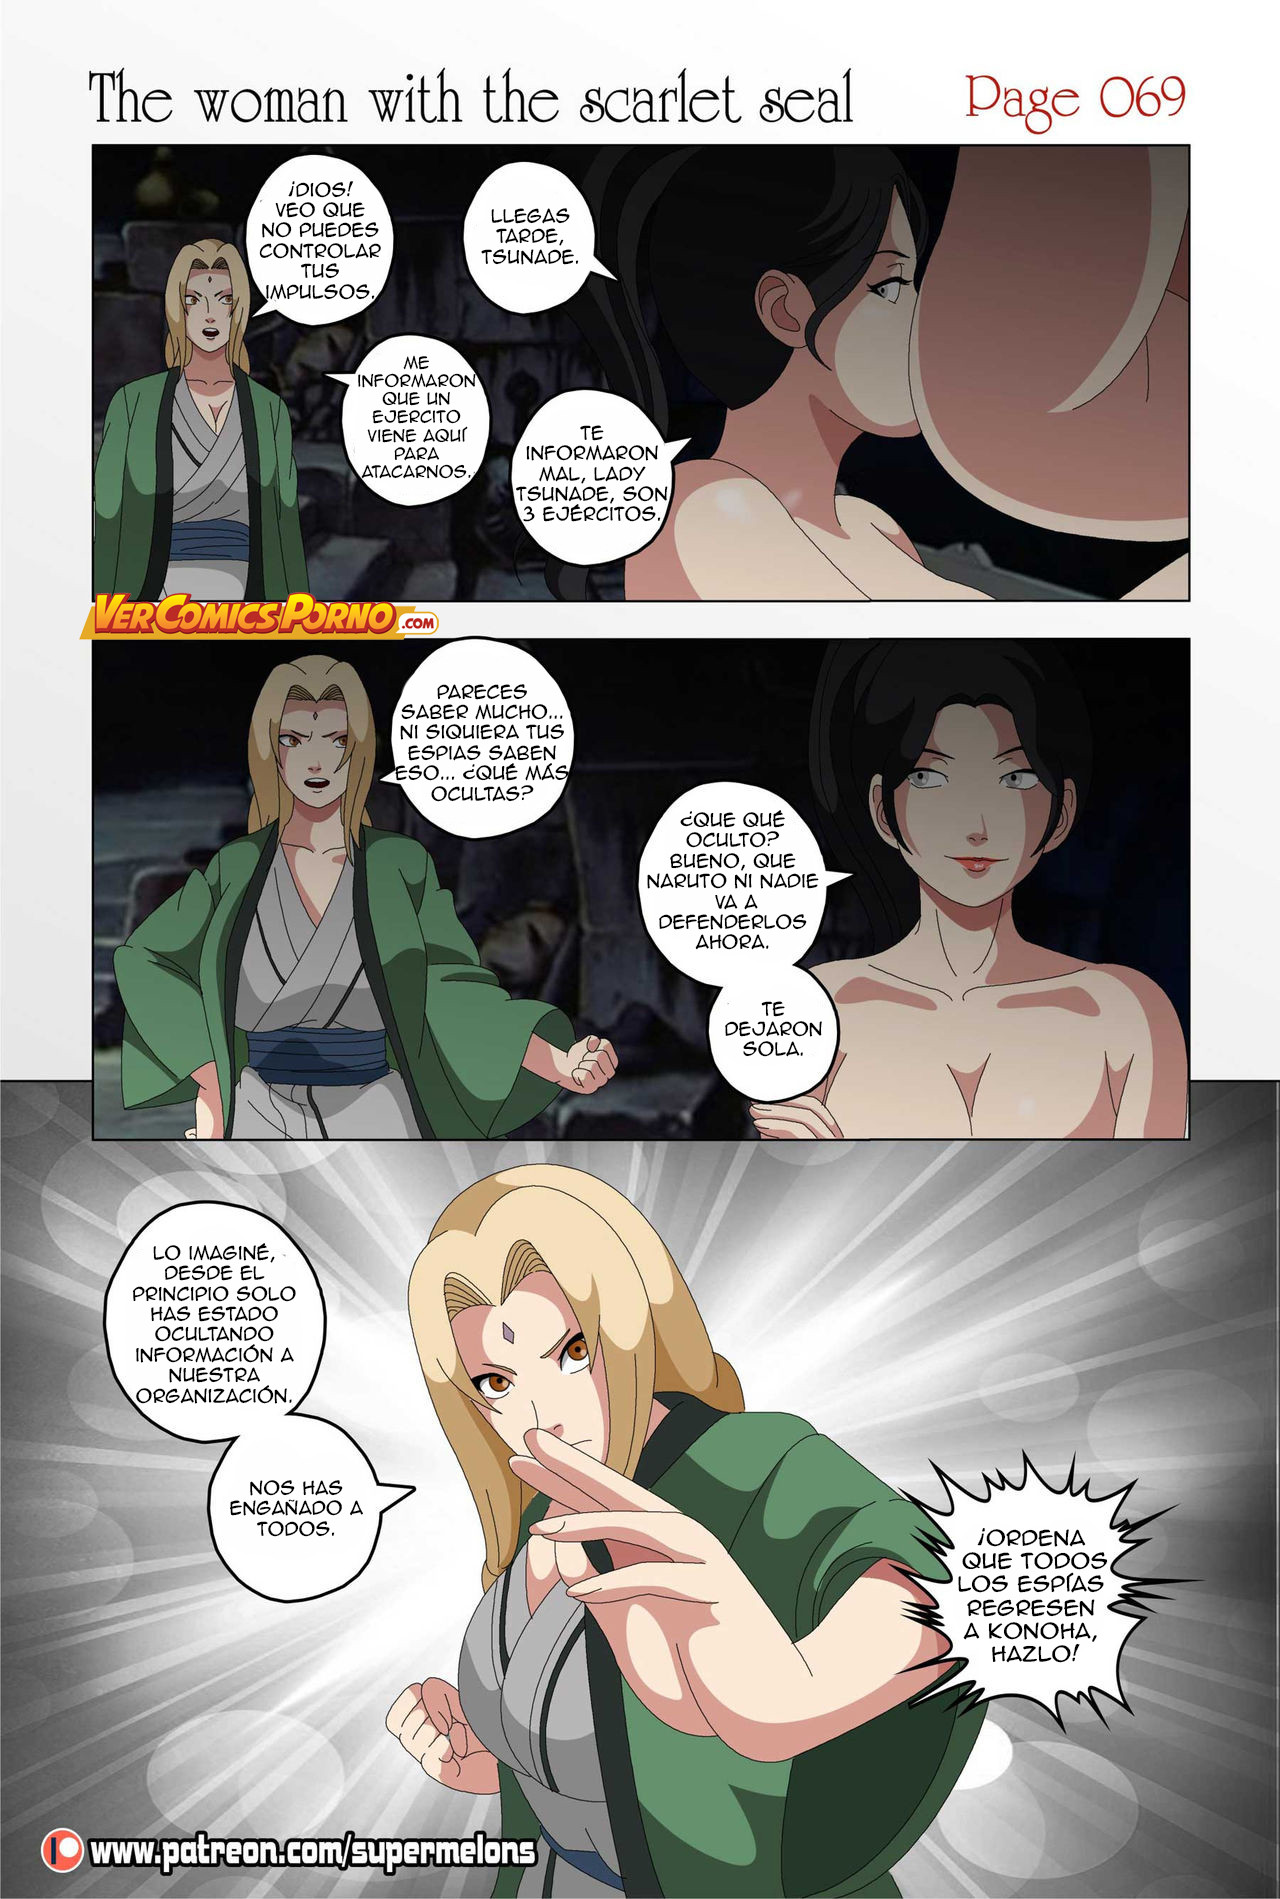 [Super Melons] The Woman with the Scarlet Seal (Traduccion Exclusiva) - 69